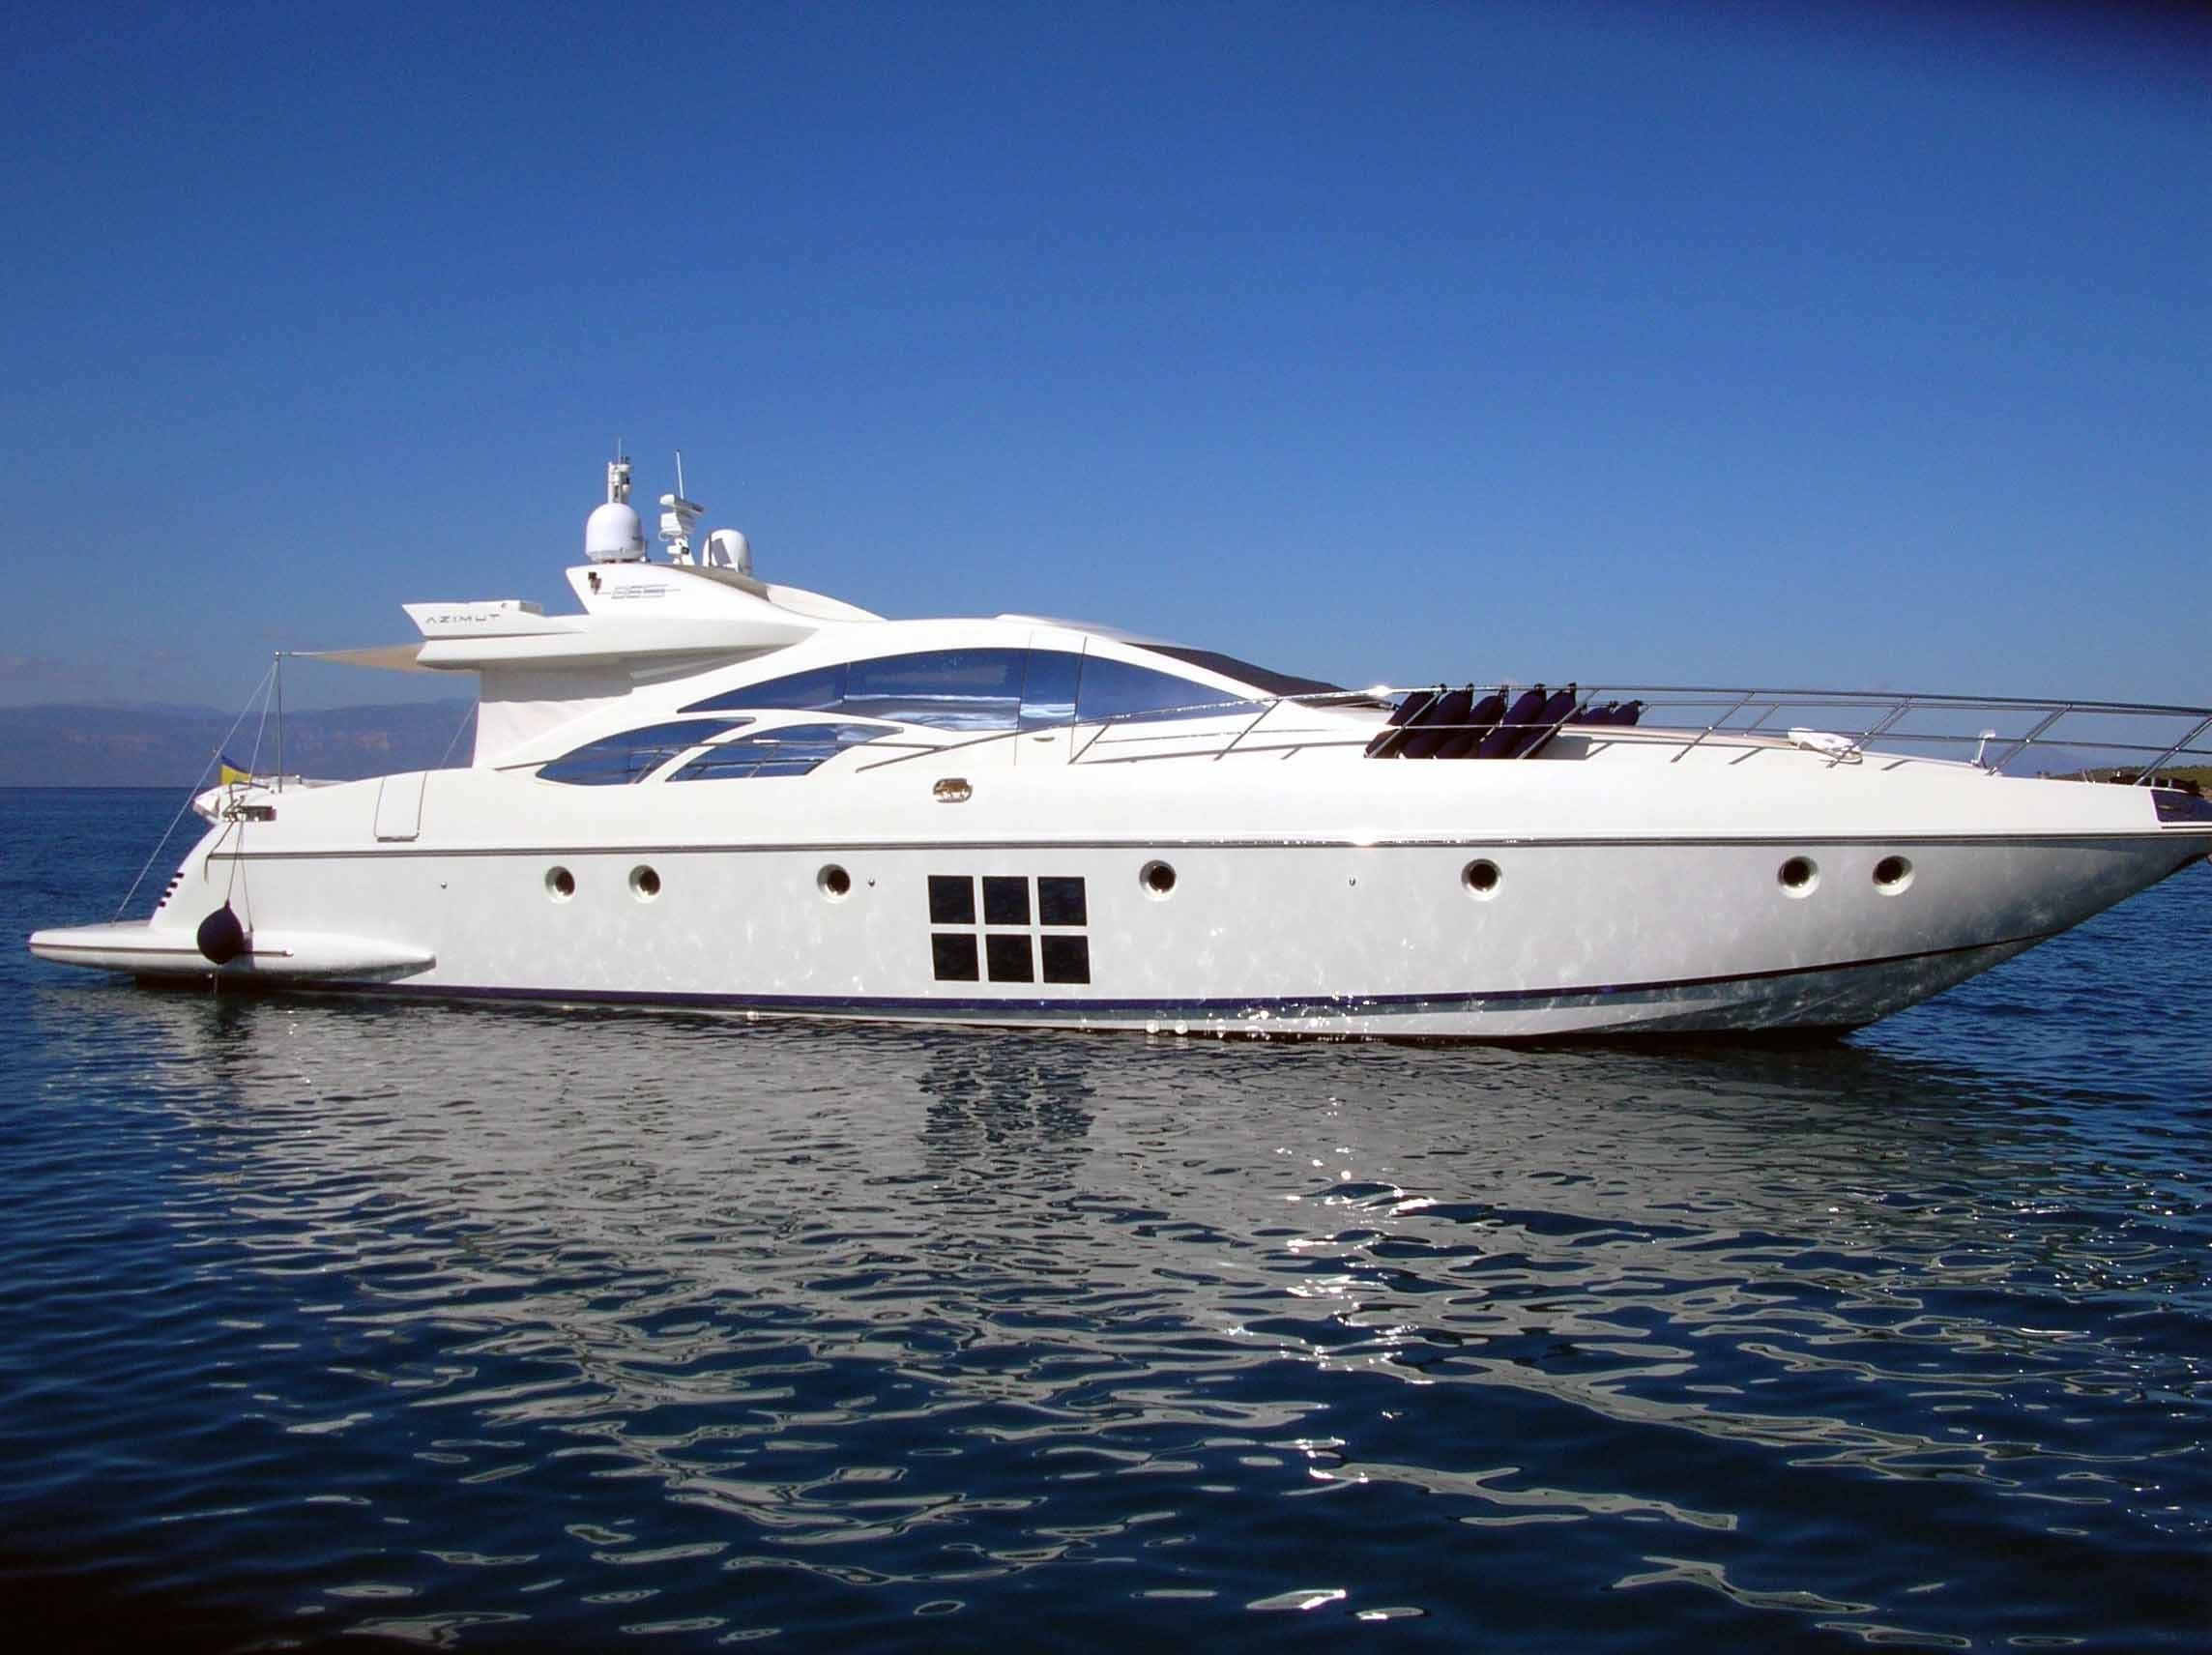 The 26m Yacht RENA N